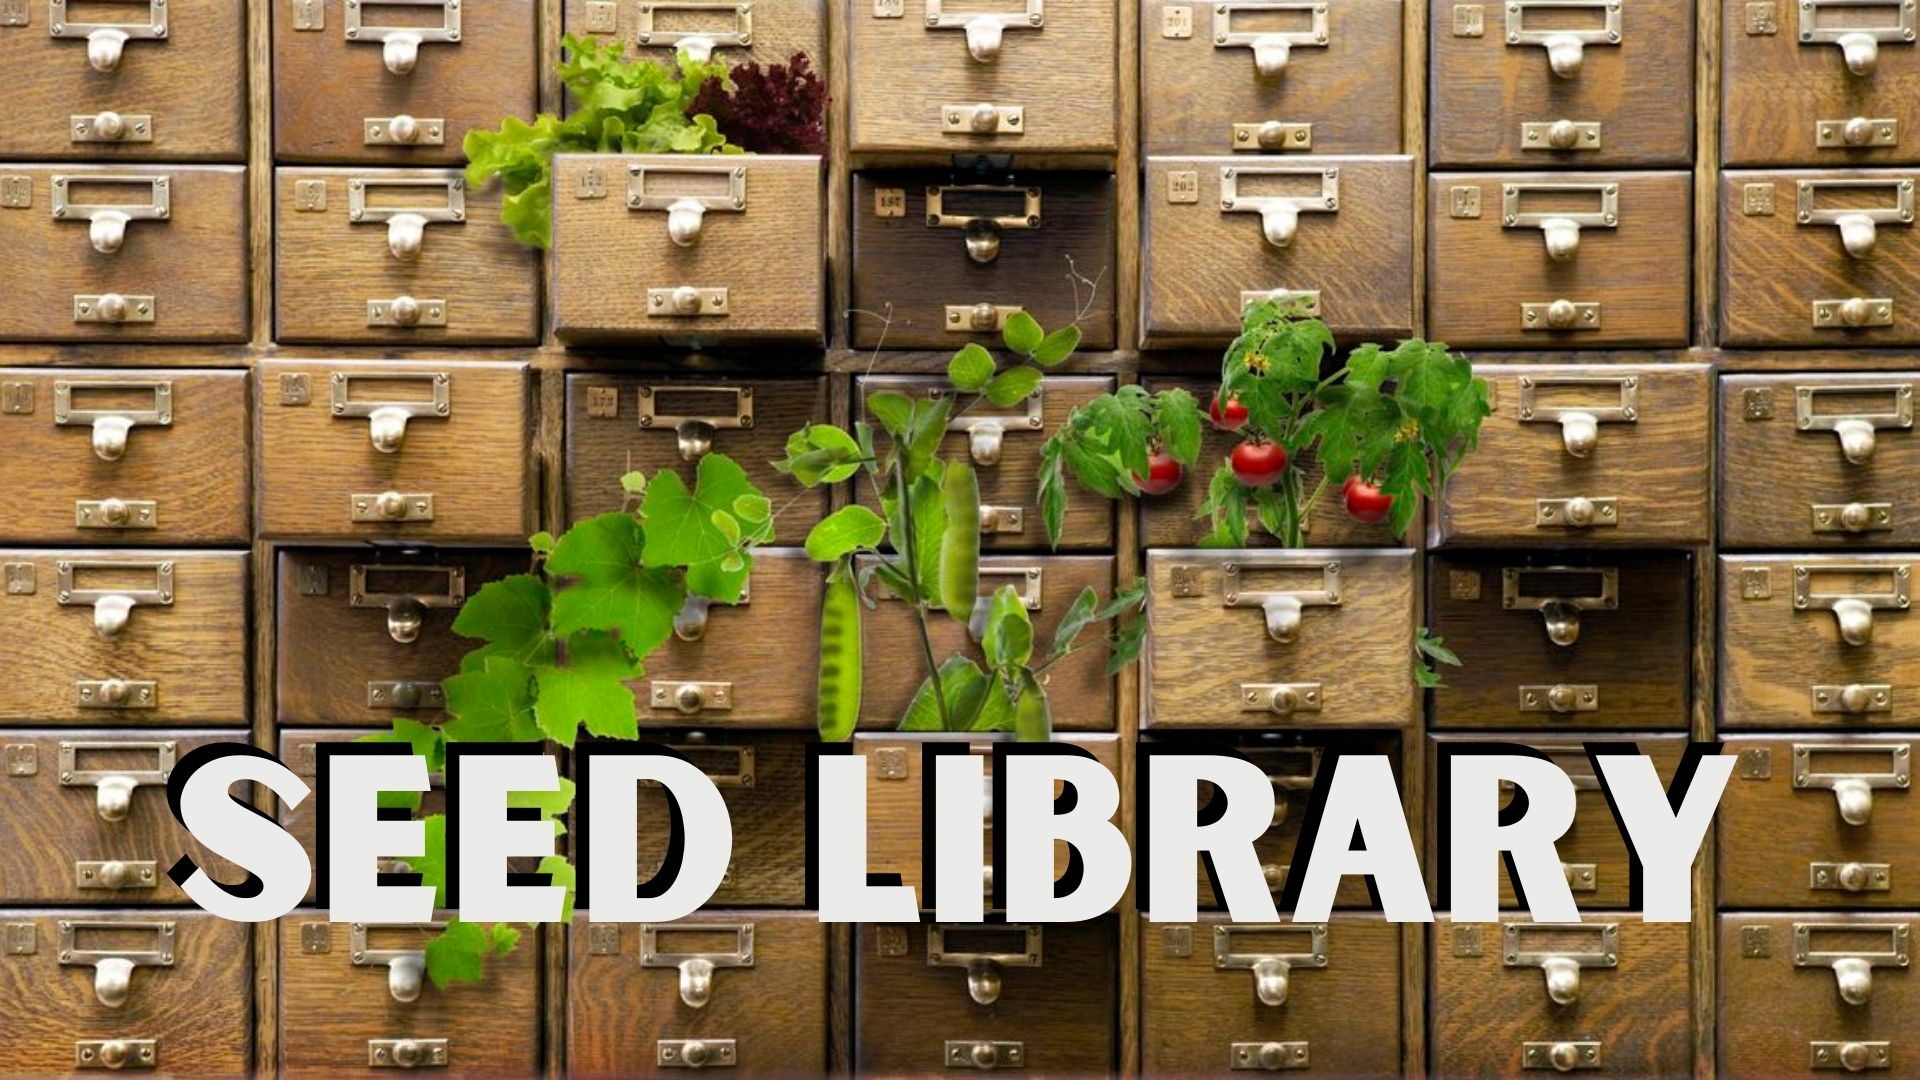 Old card catalog with plants growing out of it, text Seed Library